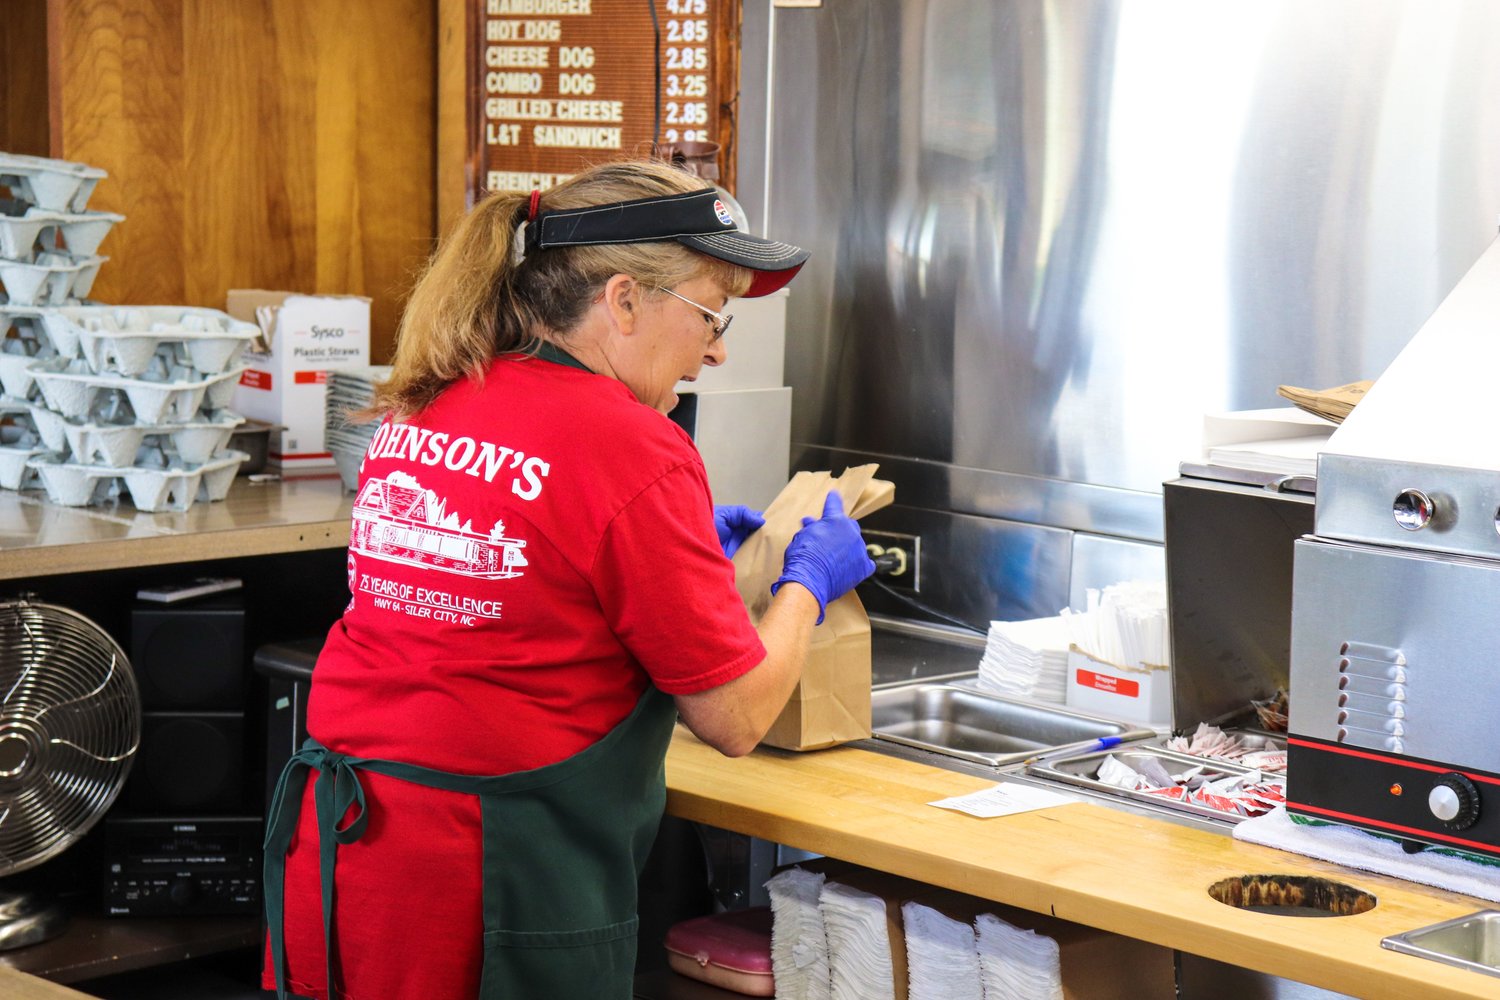 Anita Hammer prepares a food order this past Friday at Johnson’s restaurant. She’s been working at Johnson’s for 14 years.